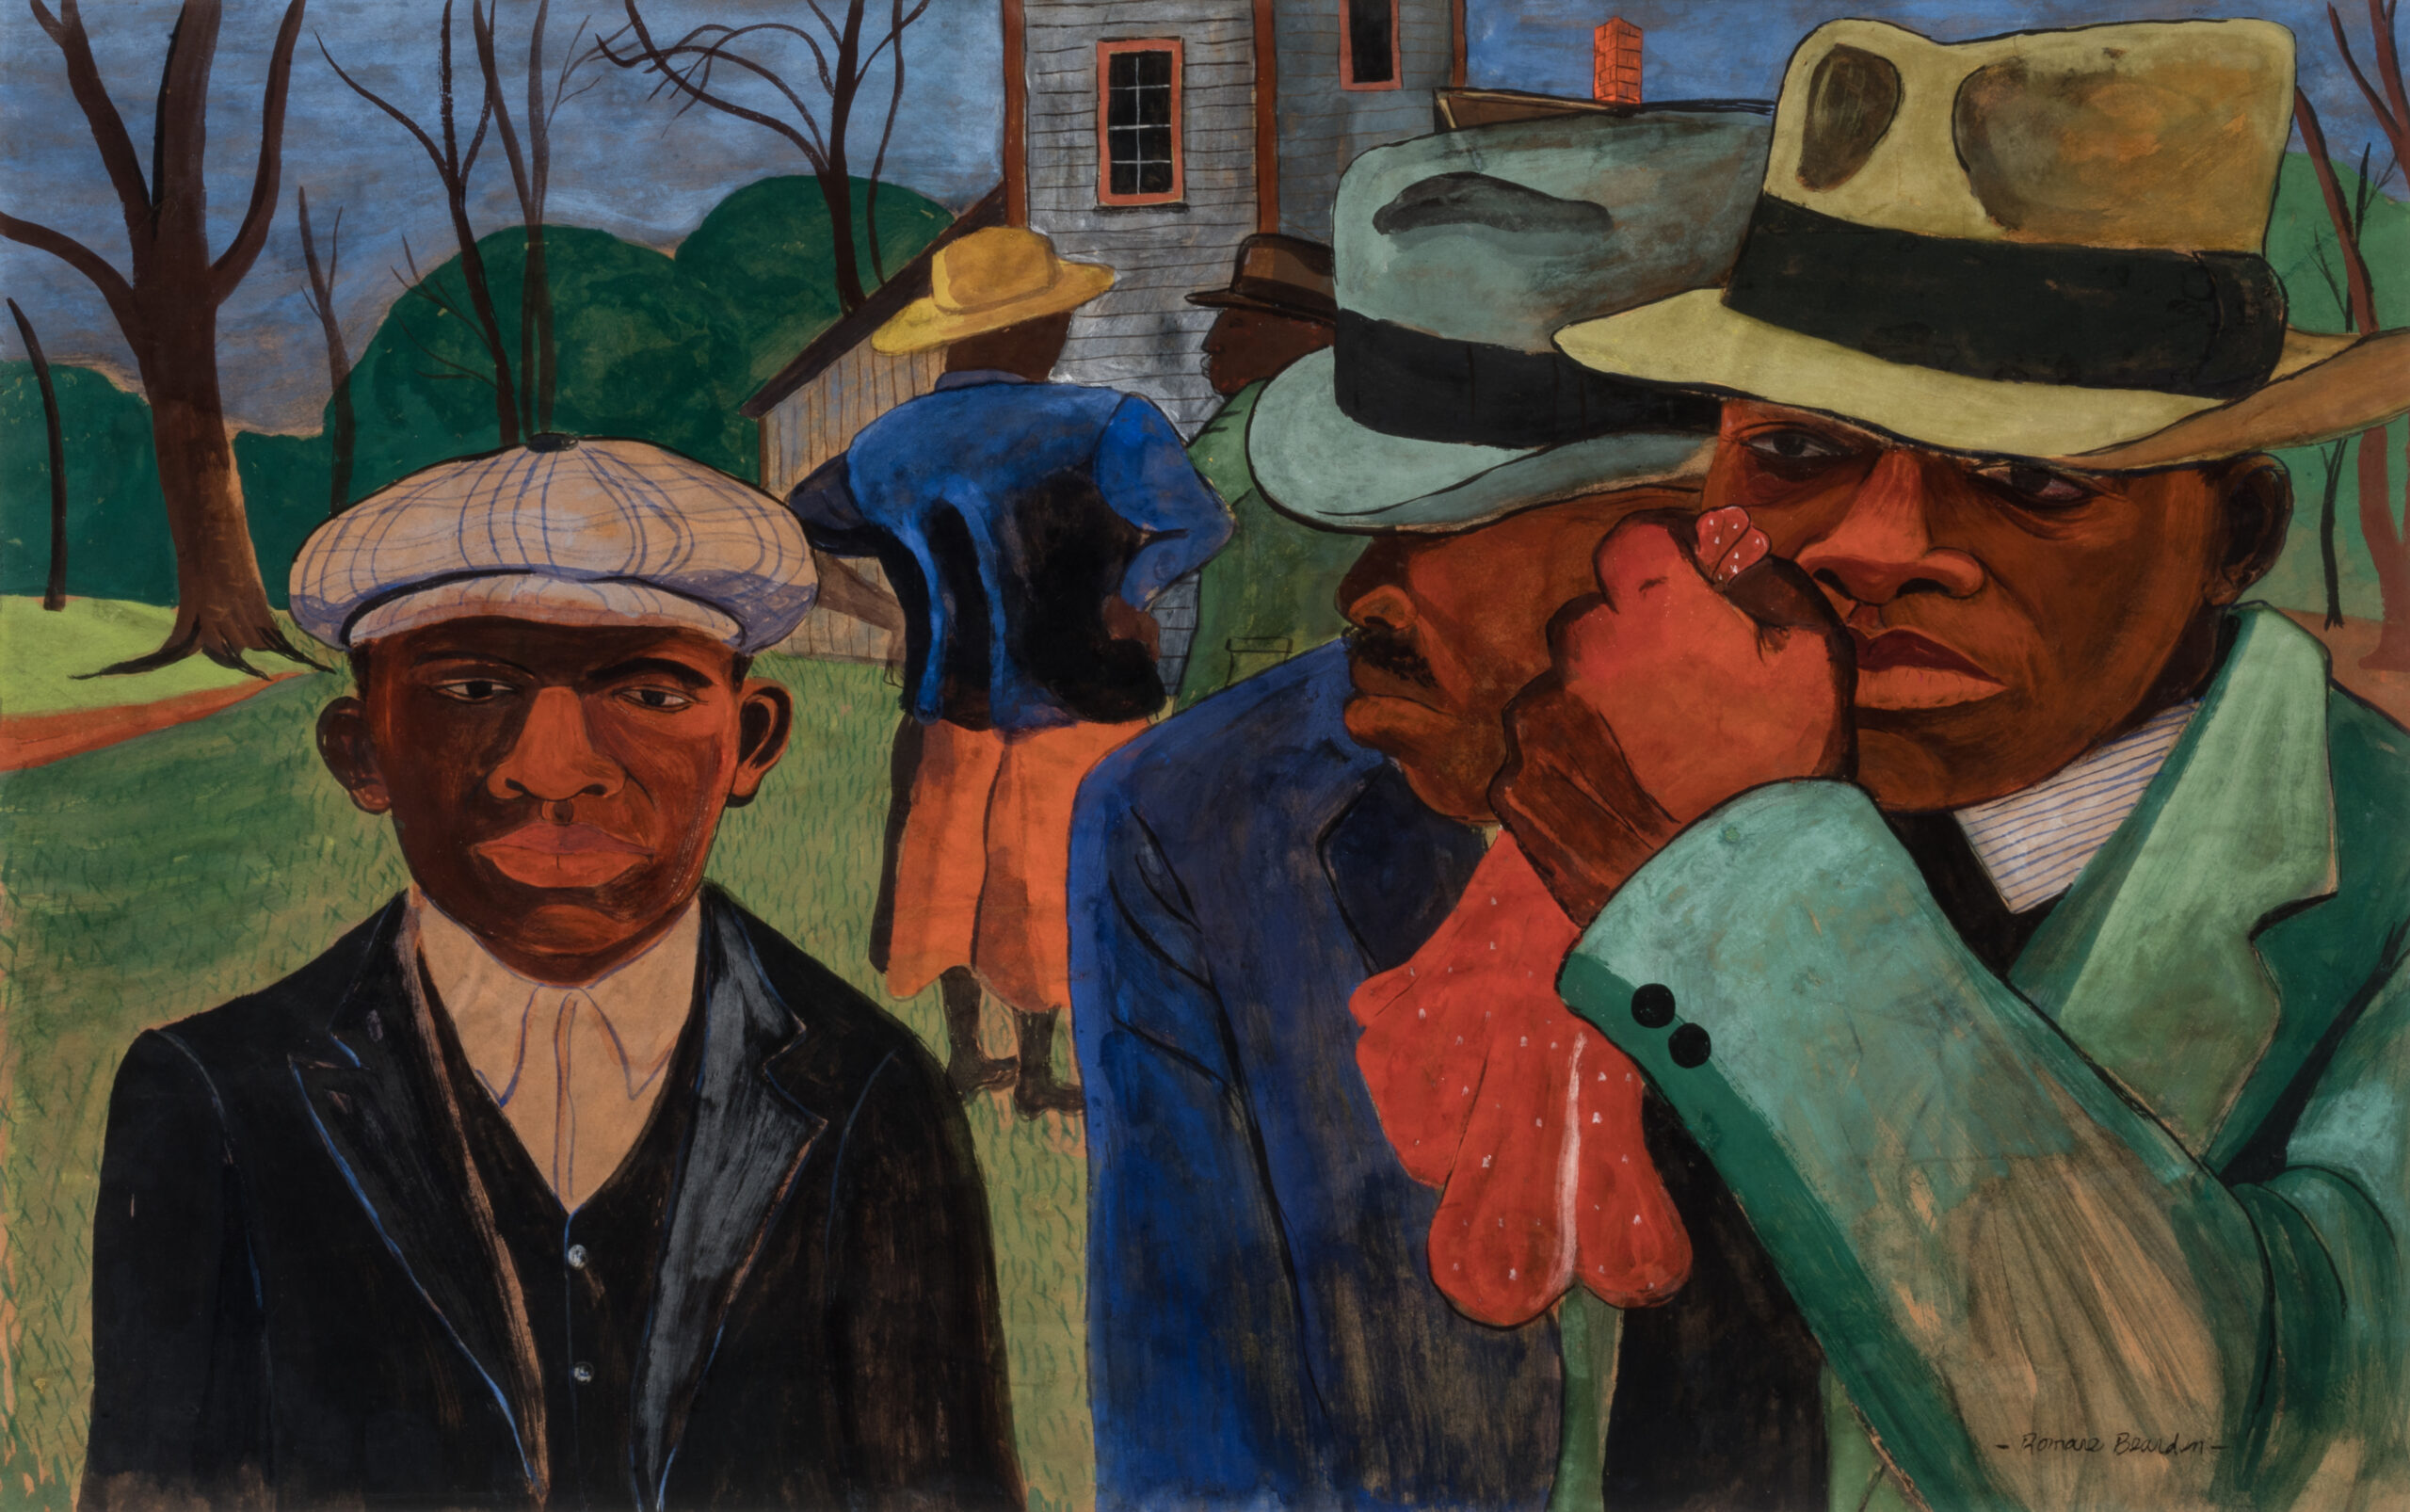 Painting of four Black men wearing suits and hats in a church yard.